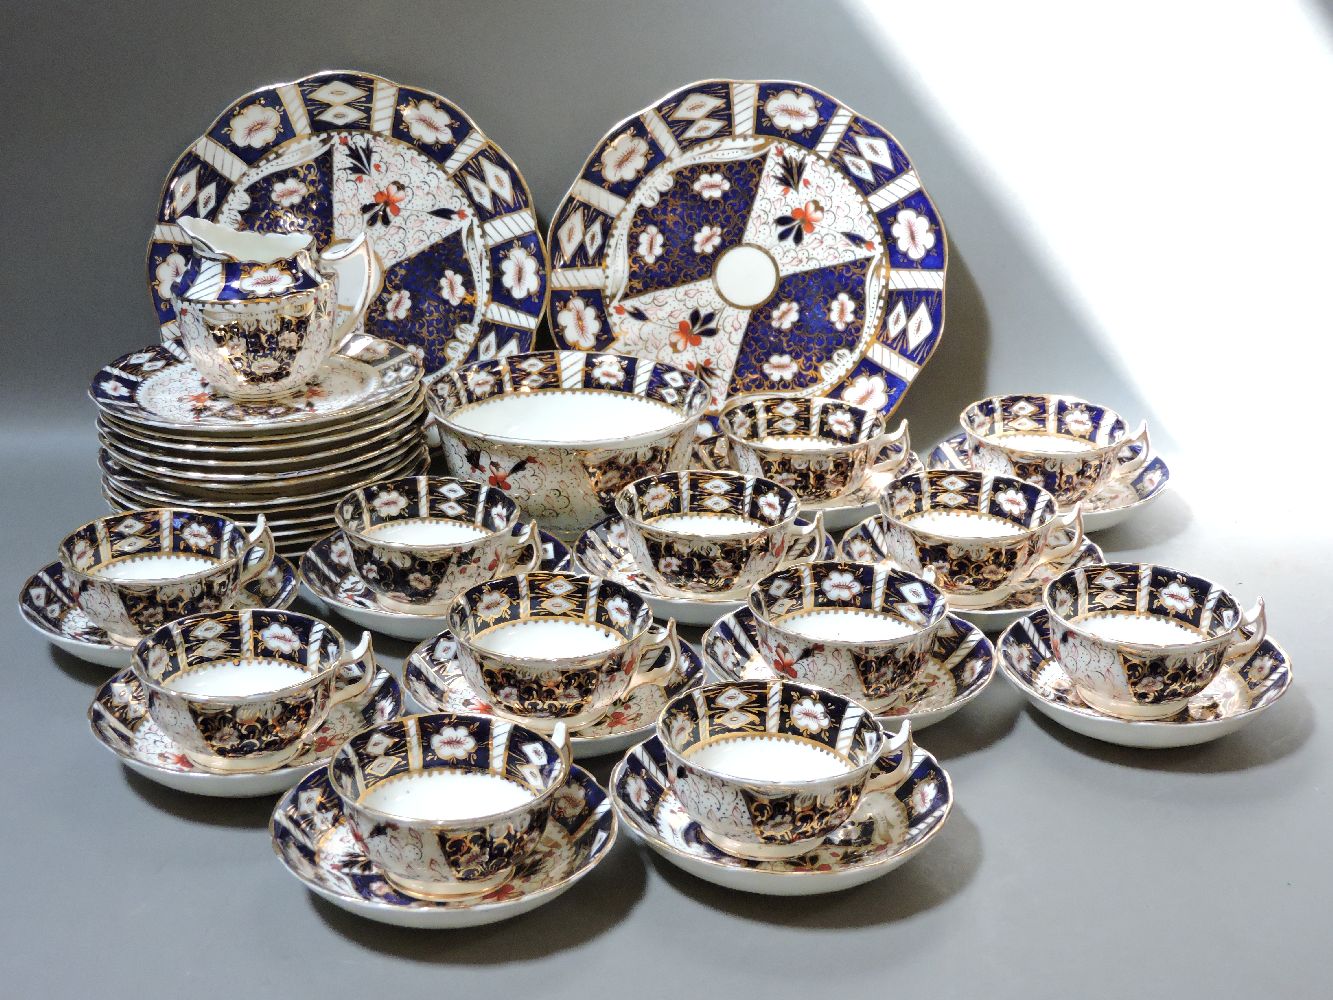 Staffordshire Imari tea wares, including a Royal Crown Derby plate, mixed porcelain cups and